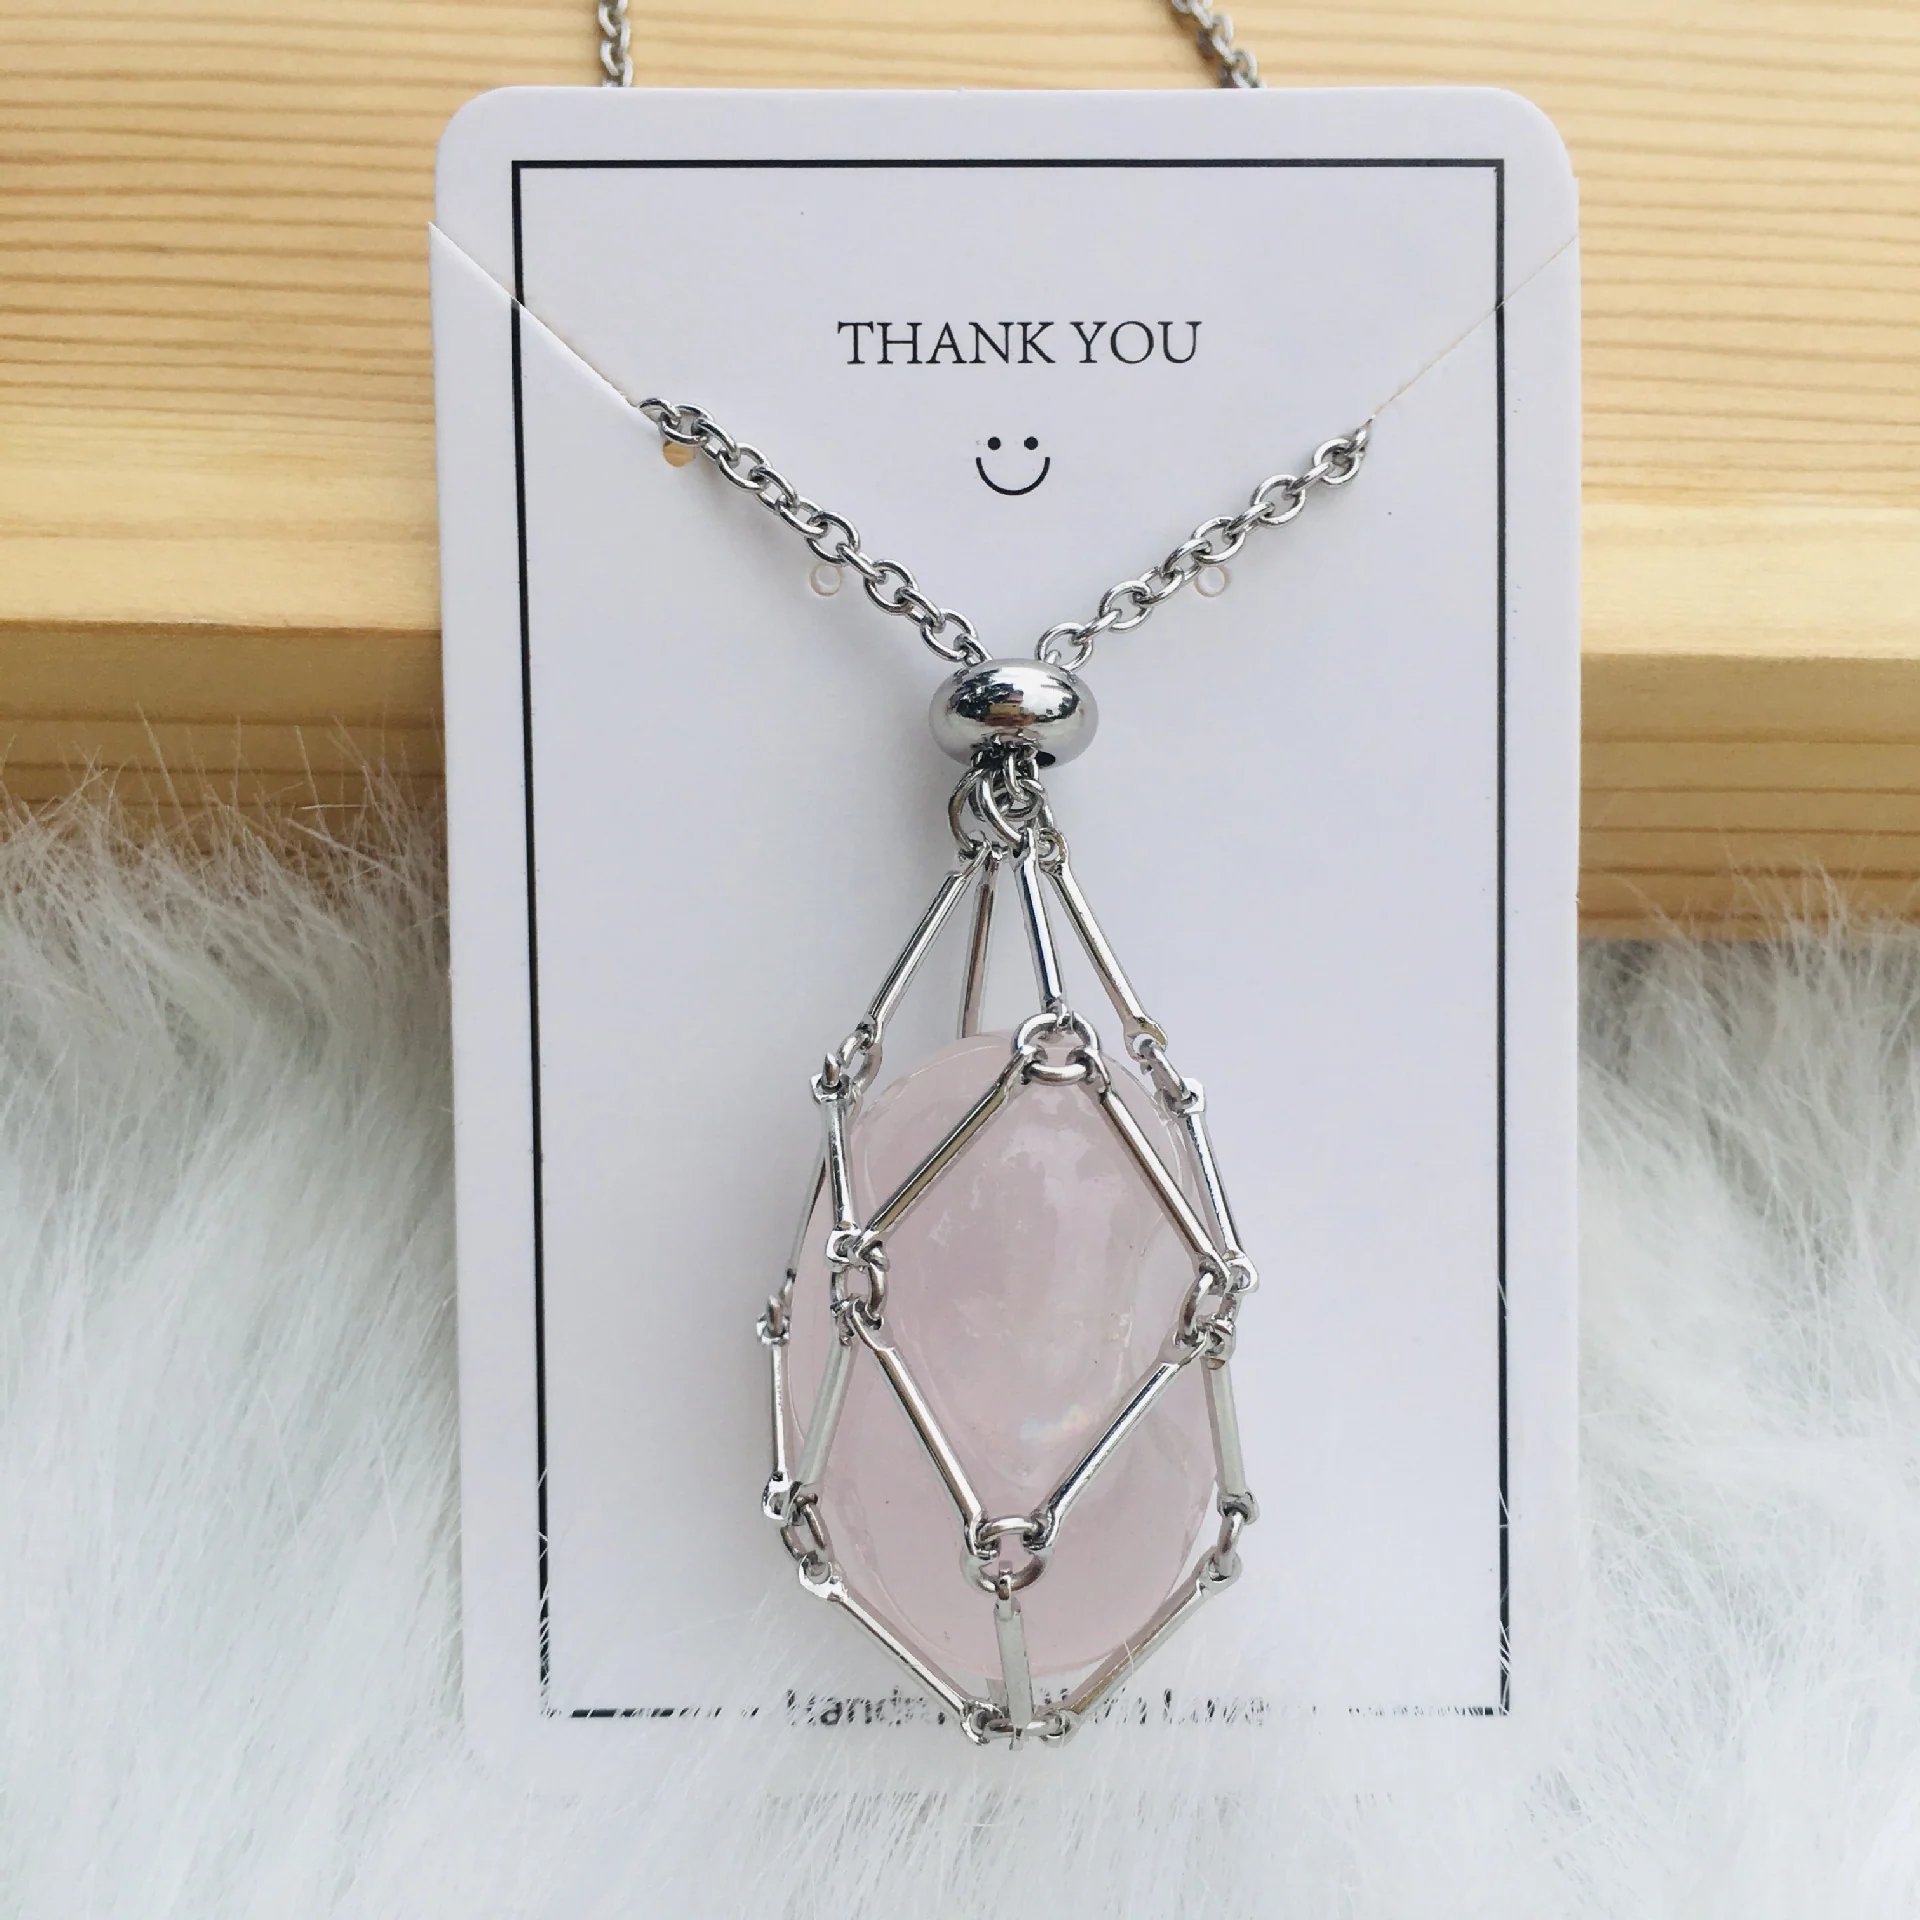 2023 Safactionm™Destiny Crystal Necklace - Free (Crystal) Gift Included🎁